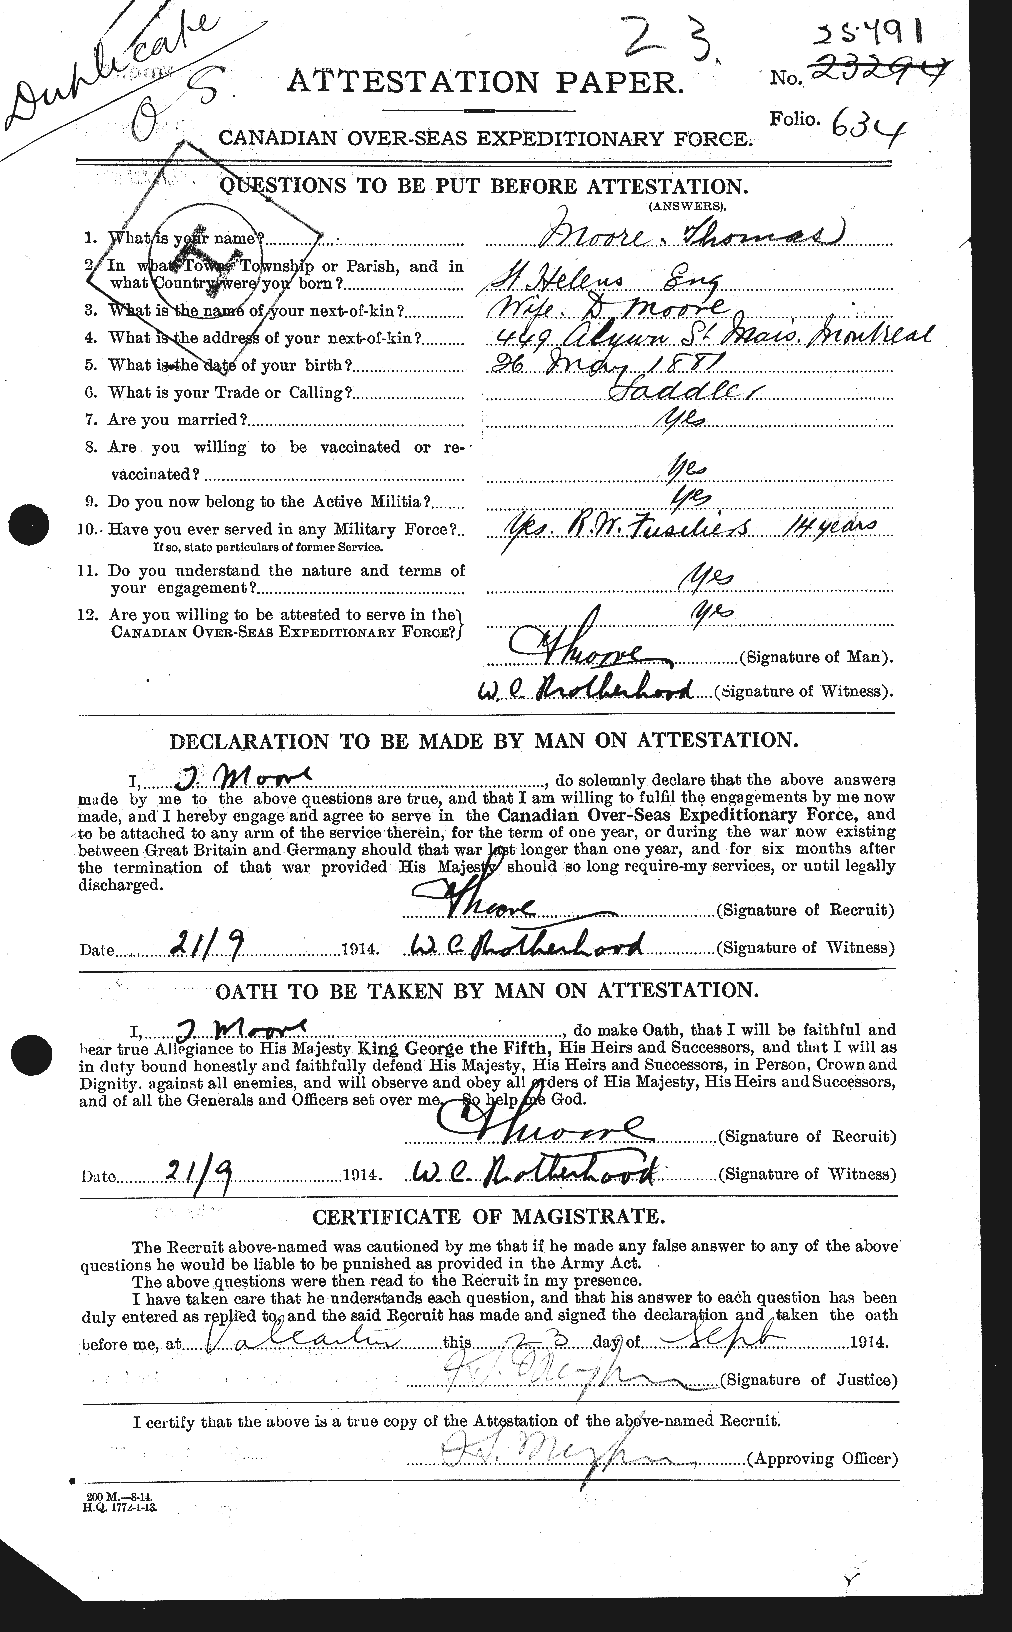 Personnel Records of the First World War - CEF 505617a